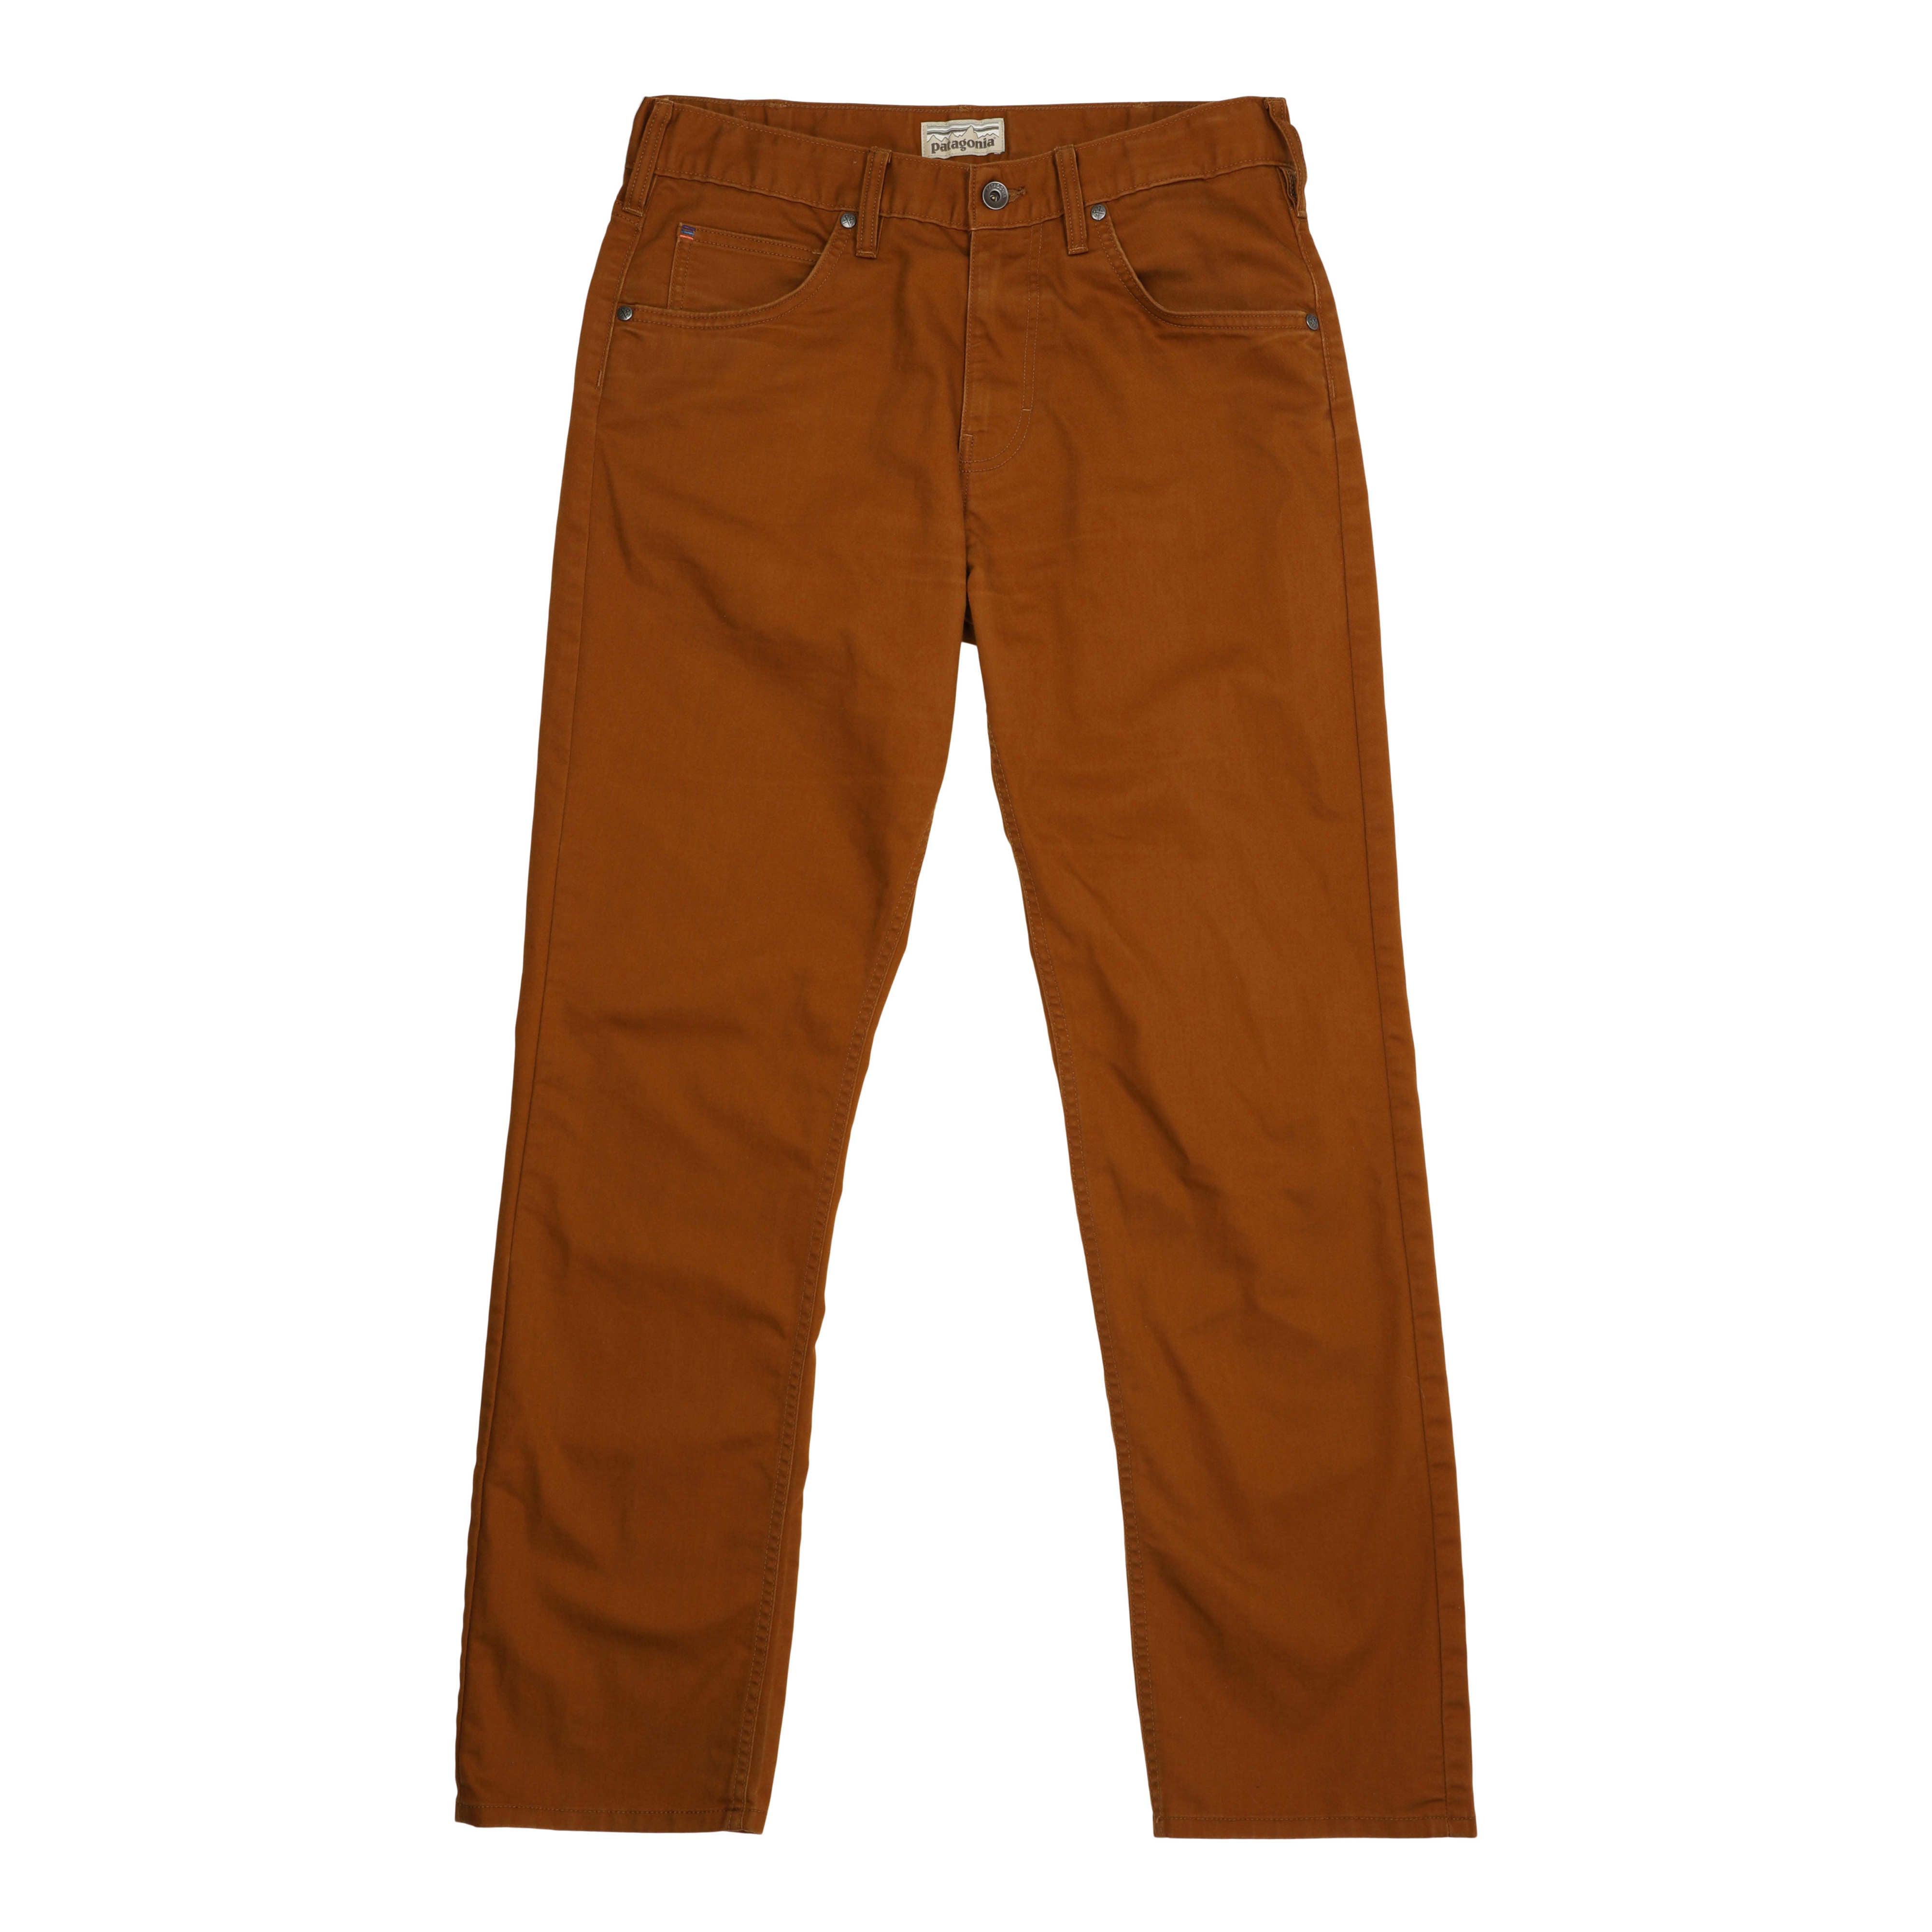 Men's Brown Bottoms Pants & Jeans by Patagonia